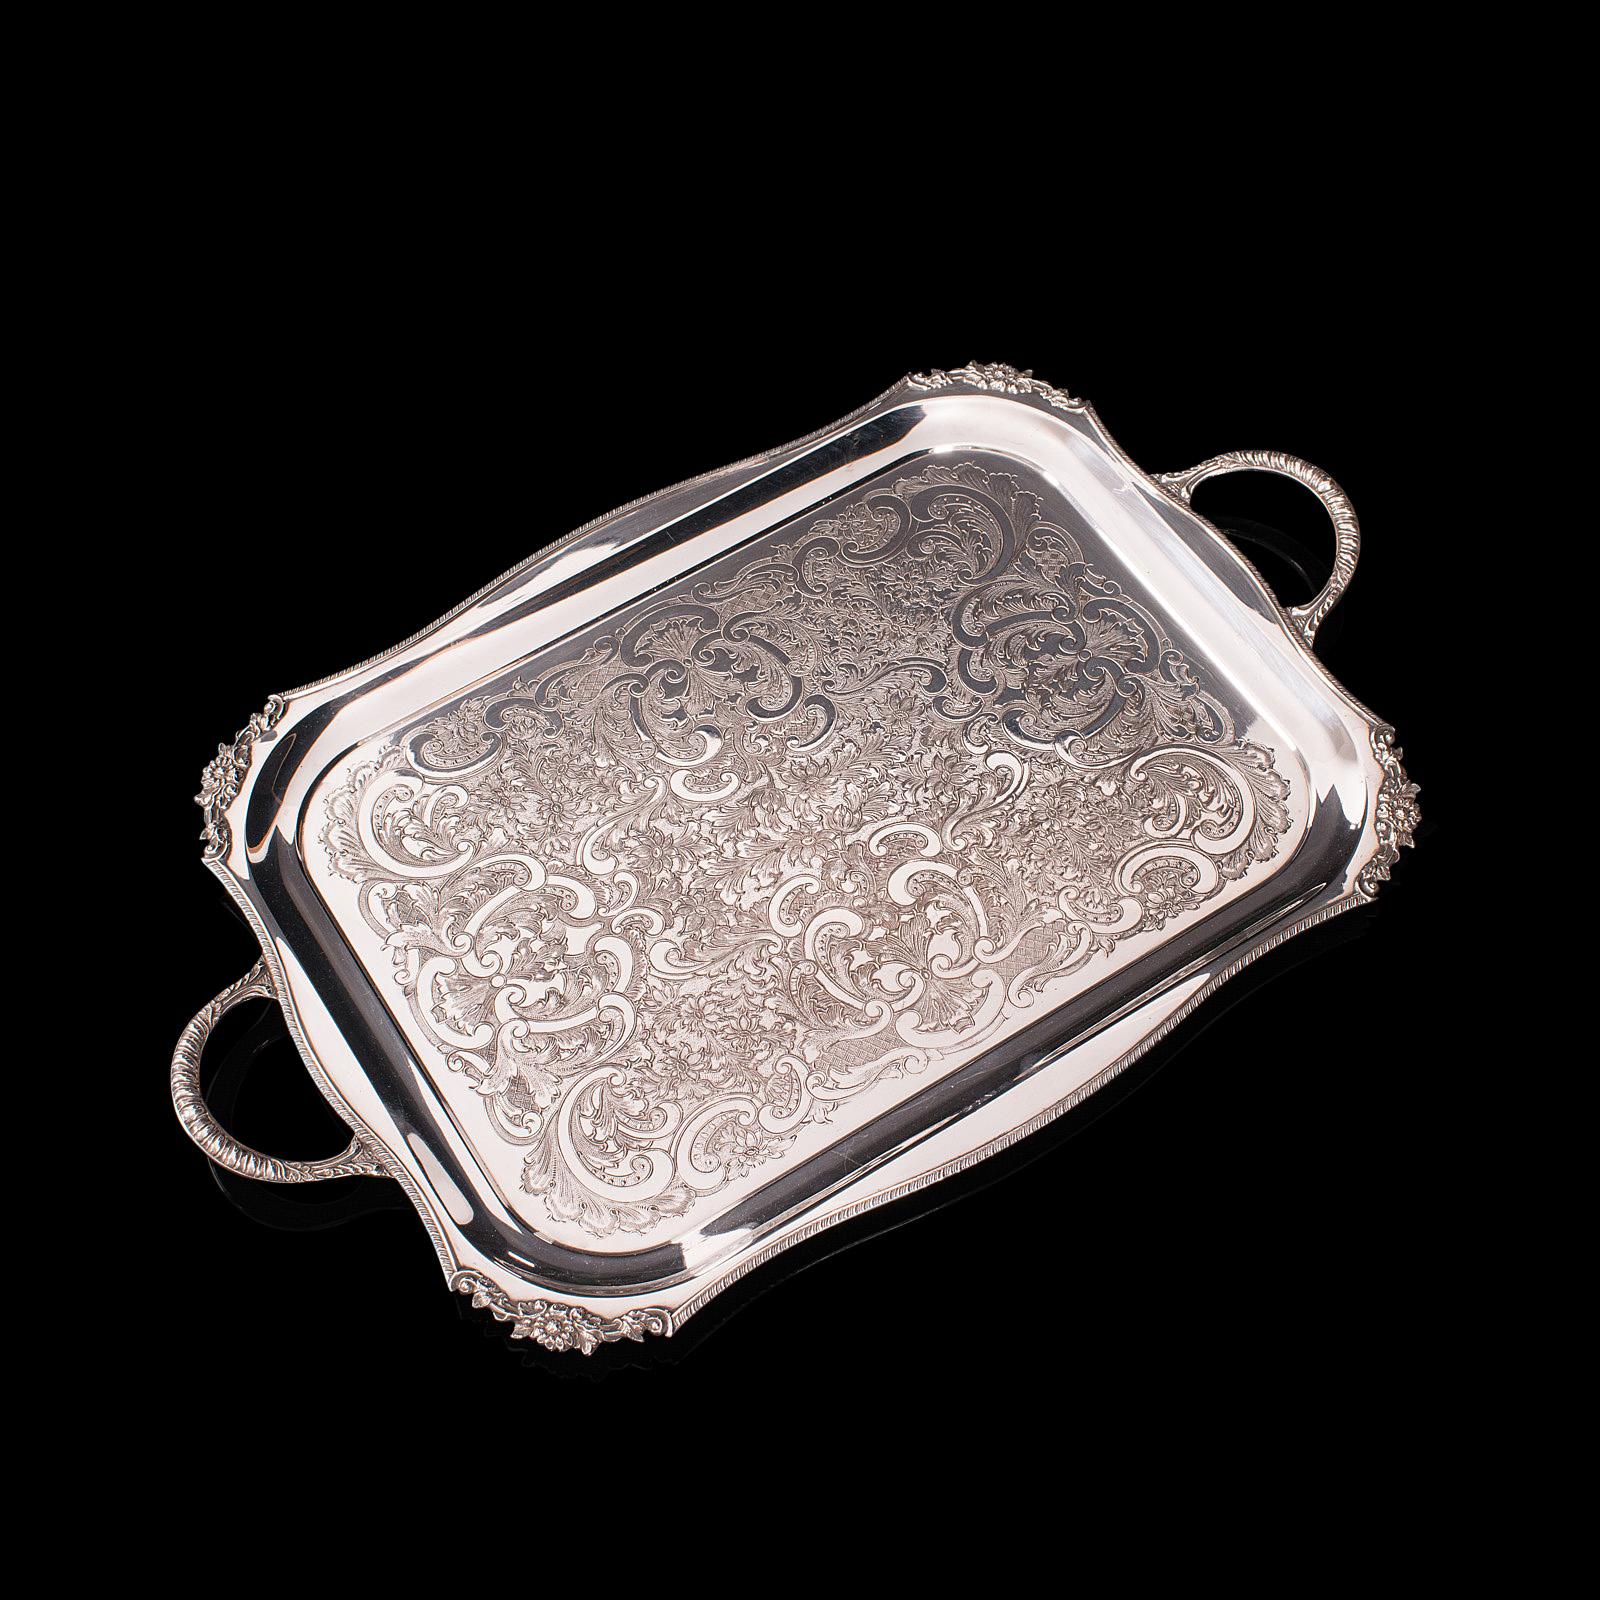 20th Century Vintage Serving Tray, English, Silver Plated Afternoon Tea Platter, Viners, 1940